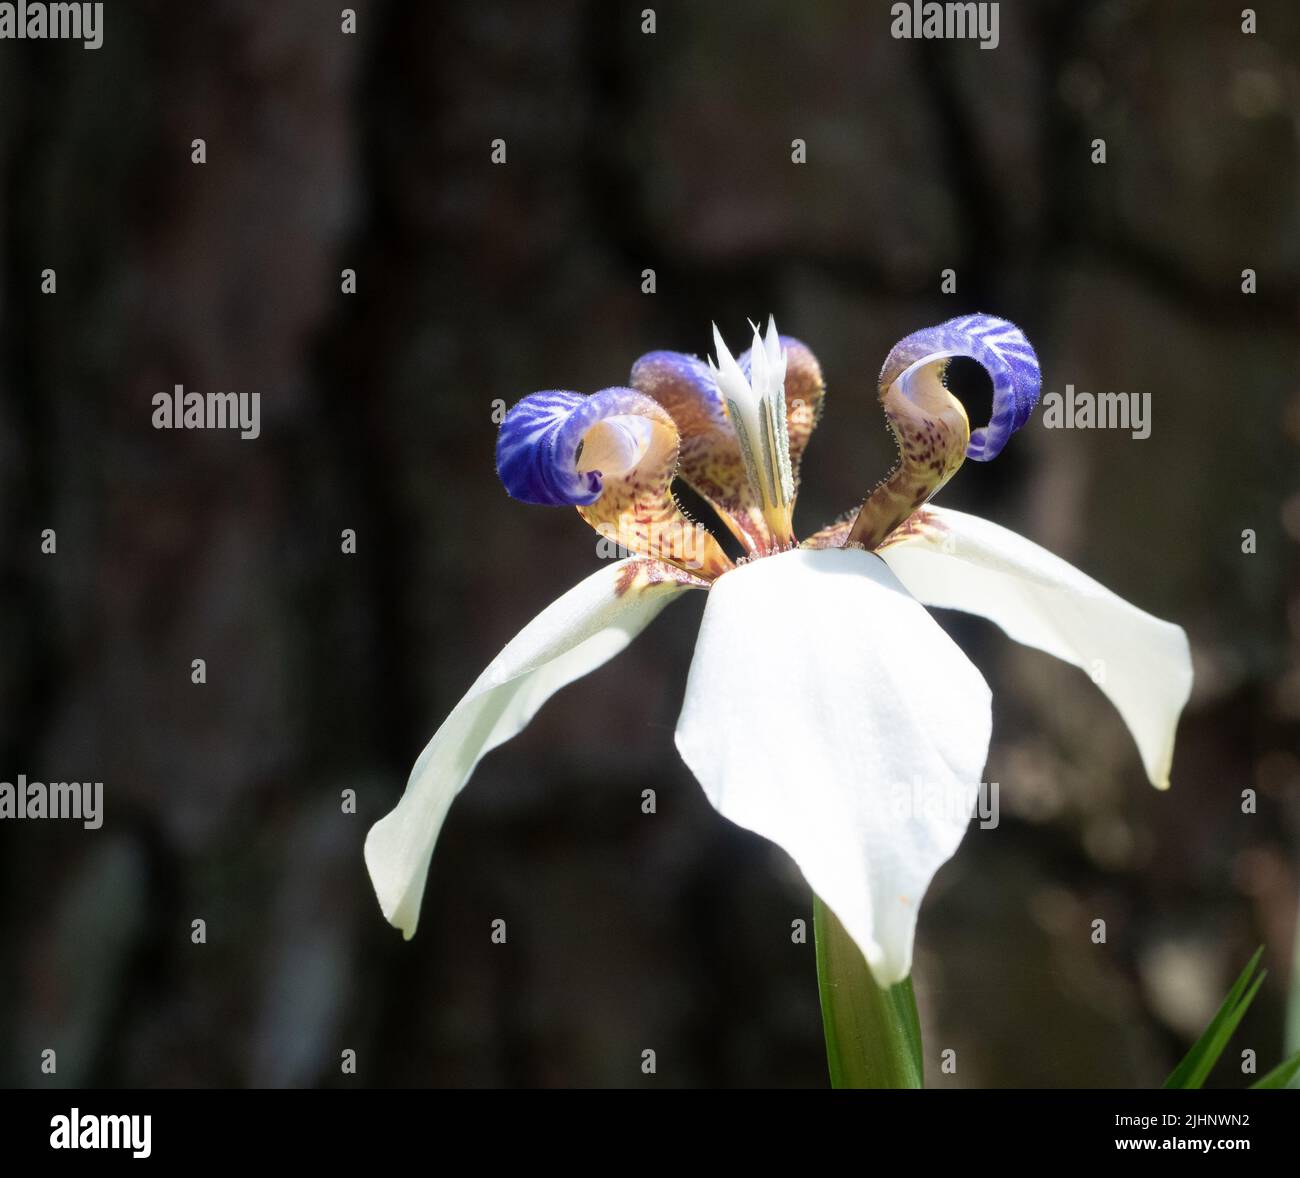 Close up of a Brazilian walking iris with white and purple petals photographed at eye level with a shallow depth of field. Stock Photo